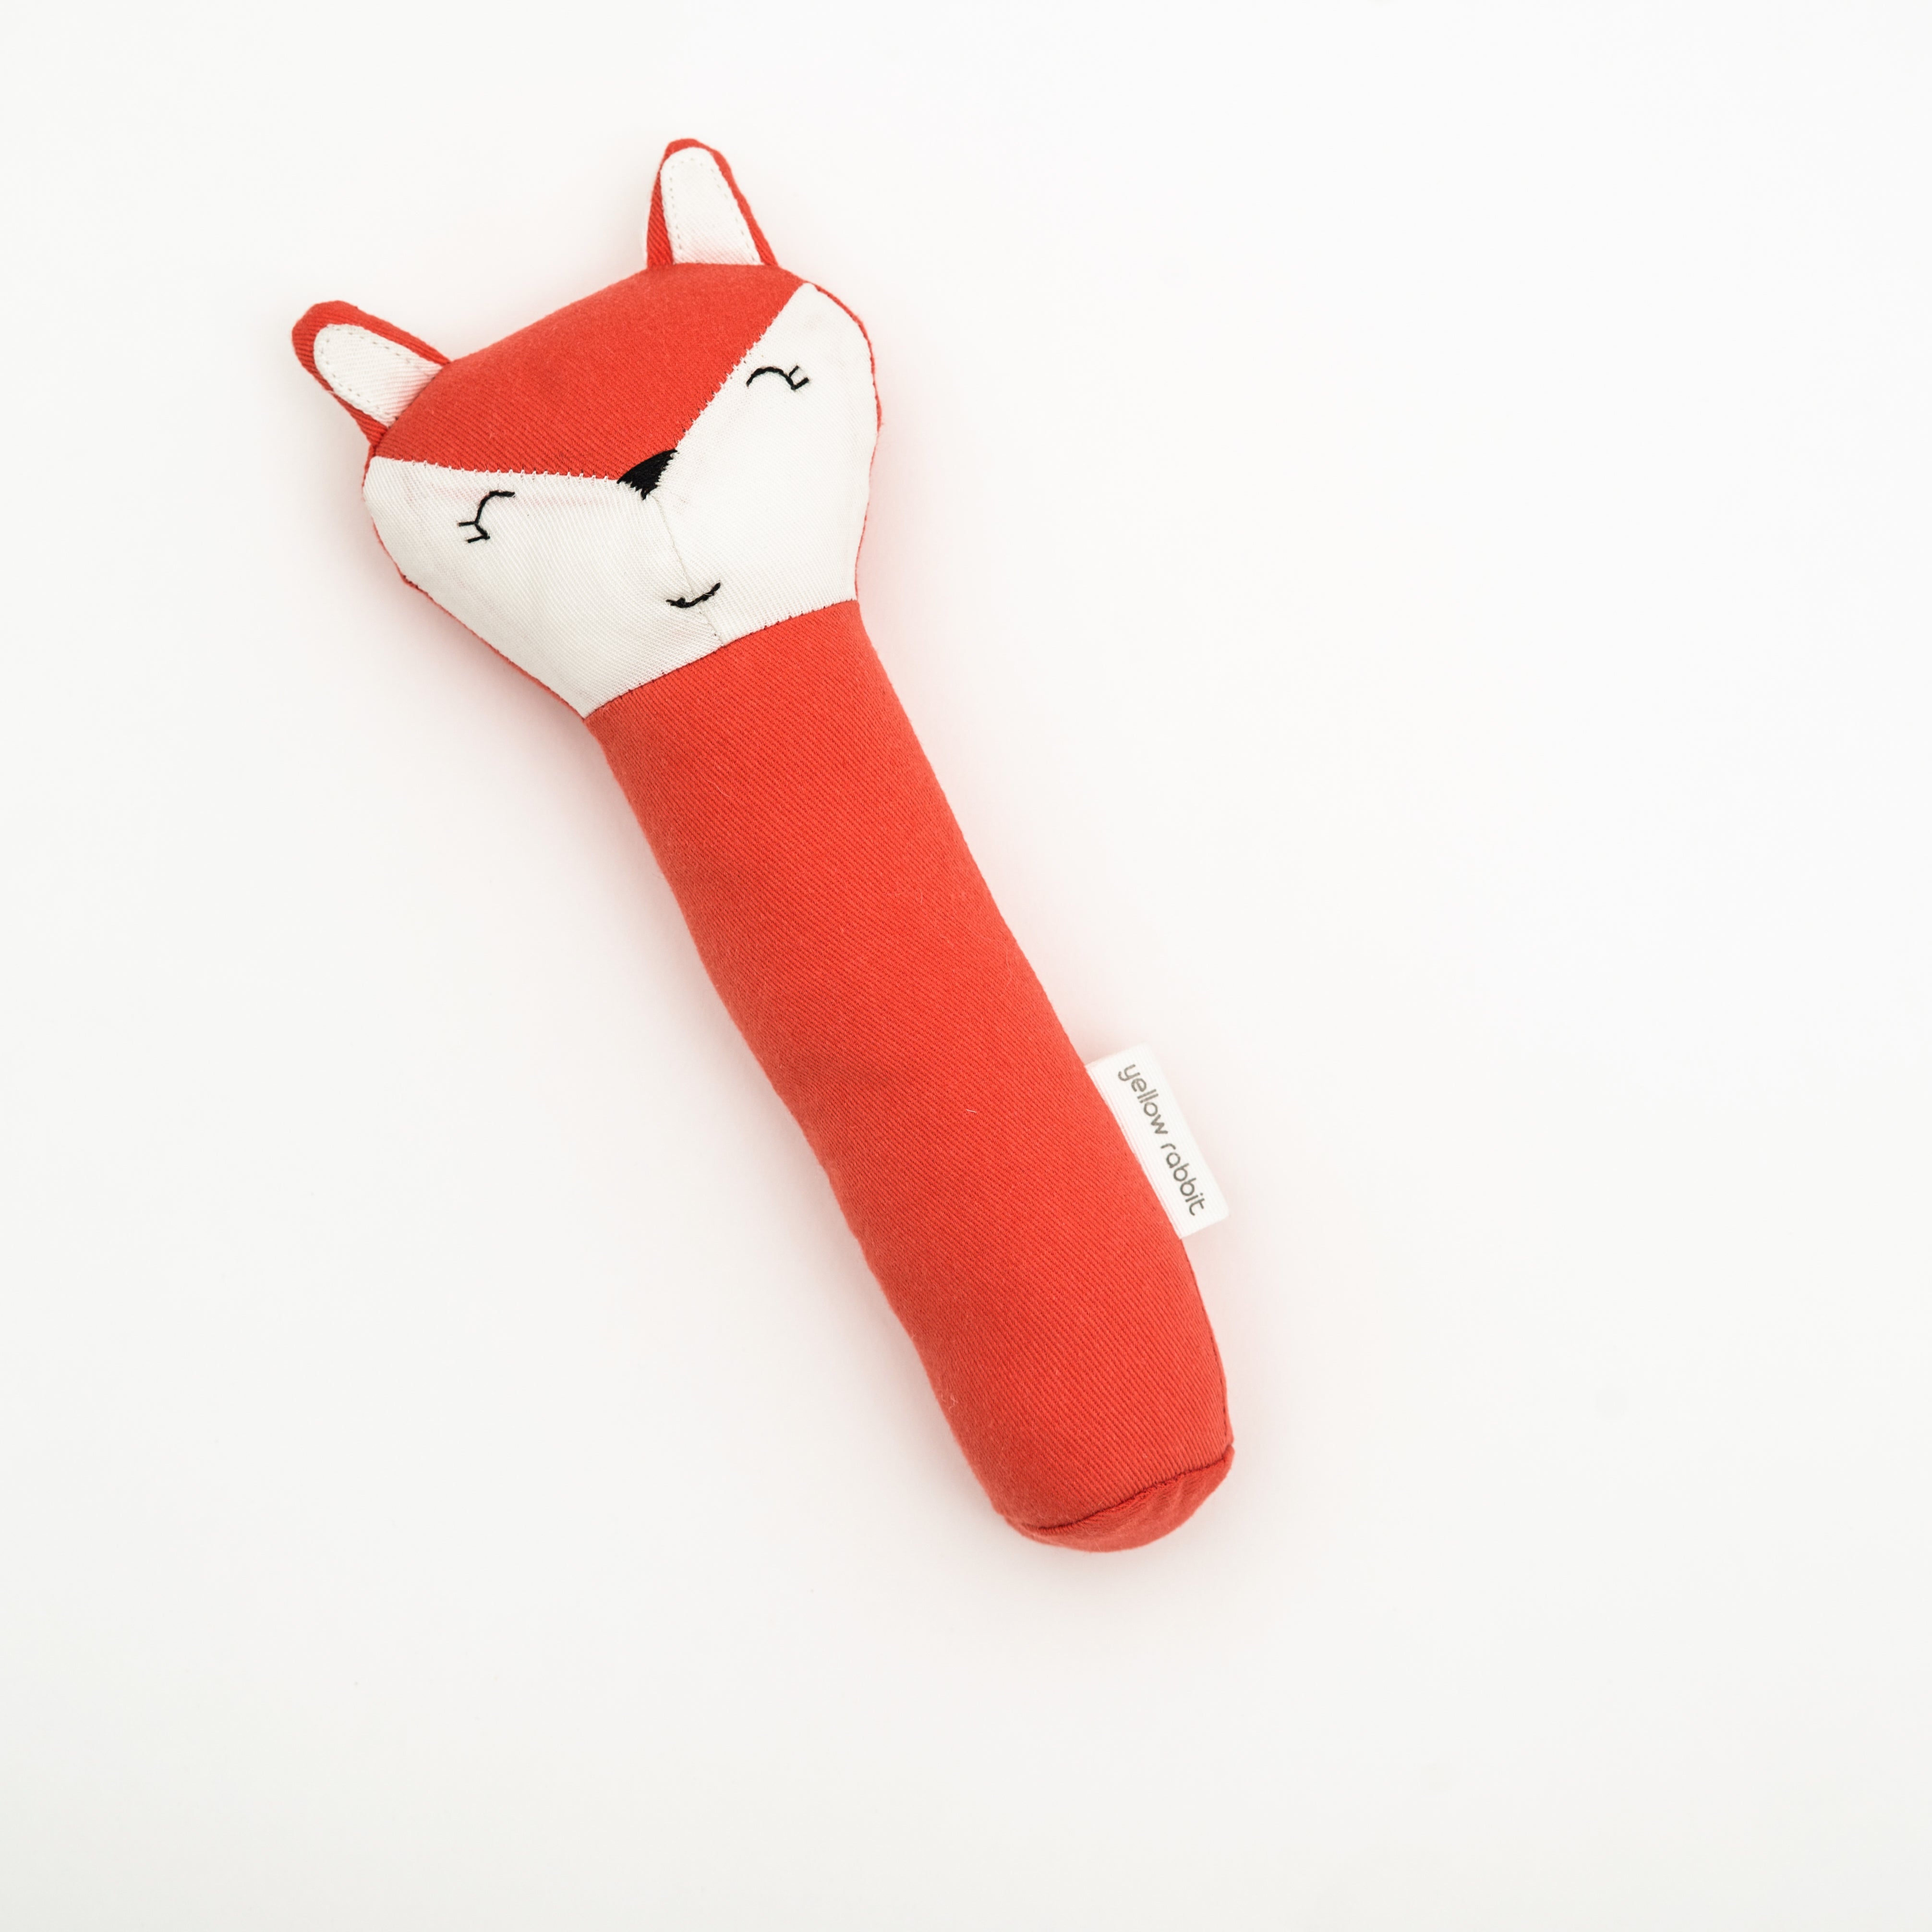 Witty fox rattle toy